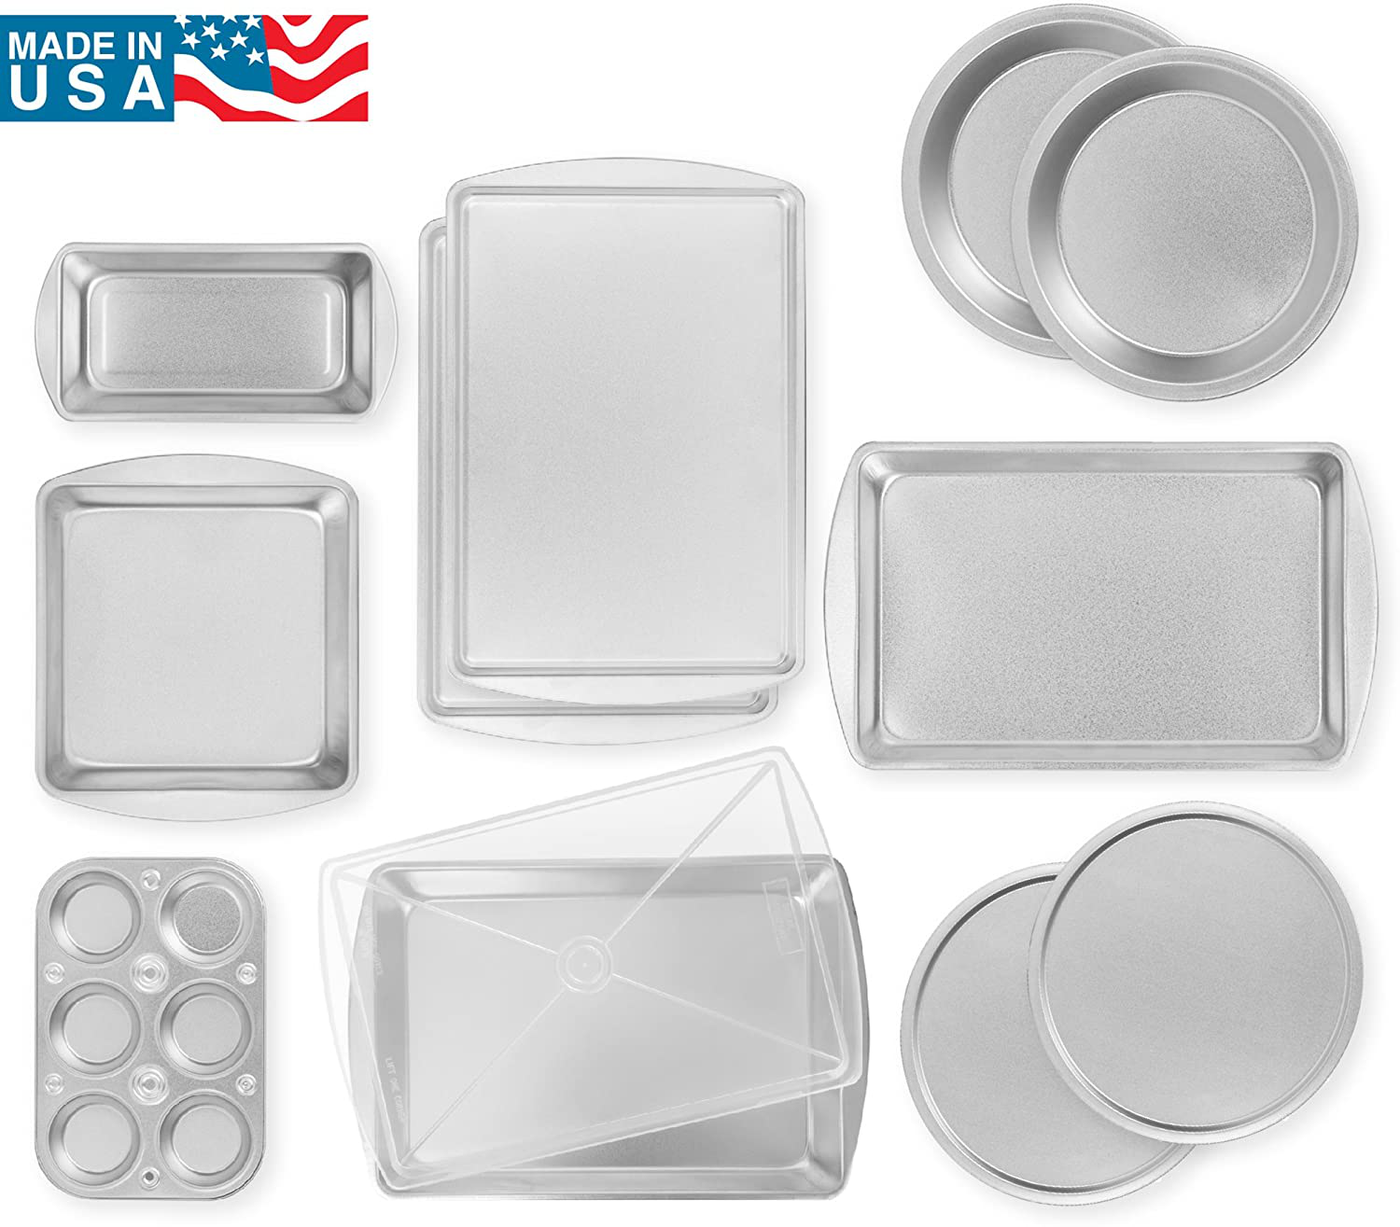 EZ Baker Uncoated, Durable Steel Construction 12-Piece Bakeware Set - Natural Baking Surface that Heats Evenly for Perfect Baking Results, Set Includes all Necessary Pans